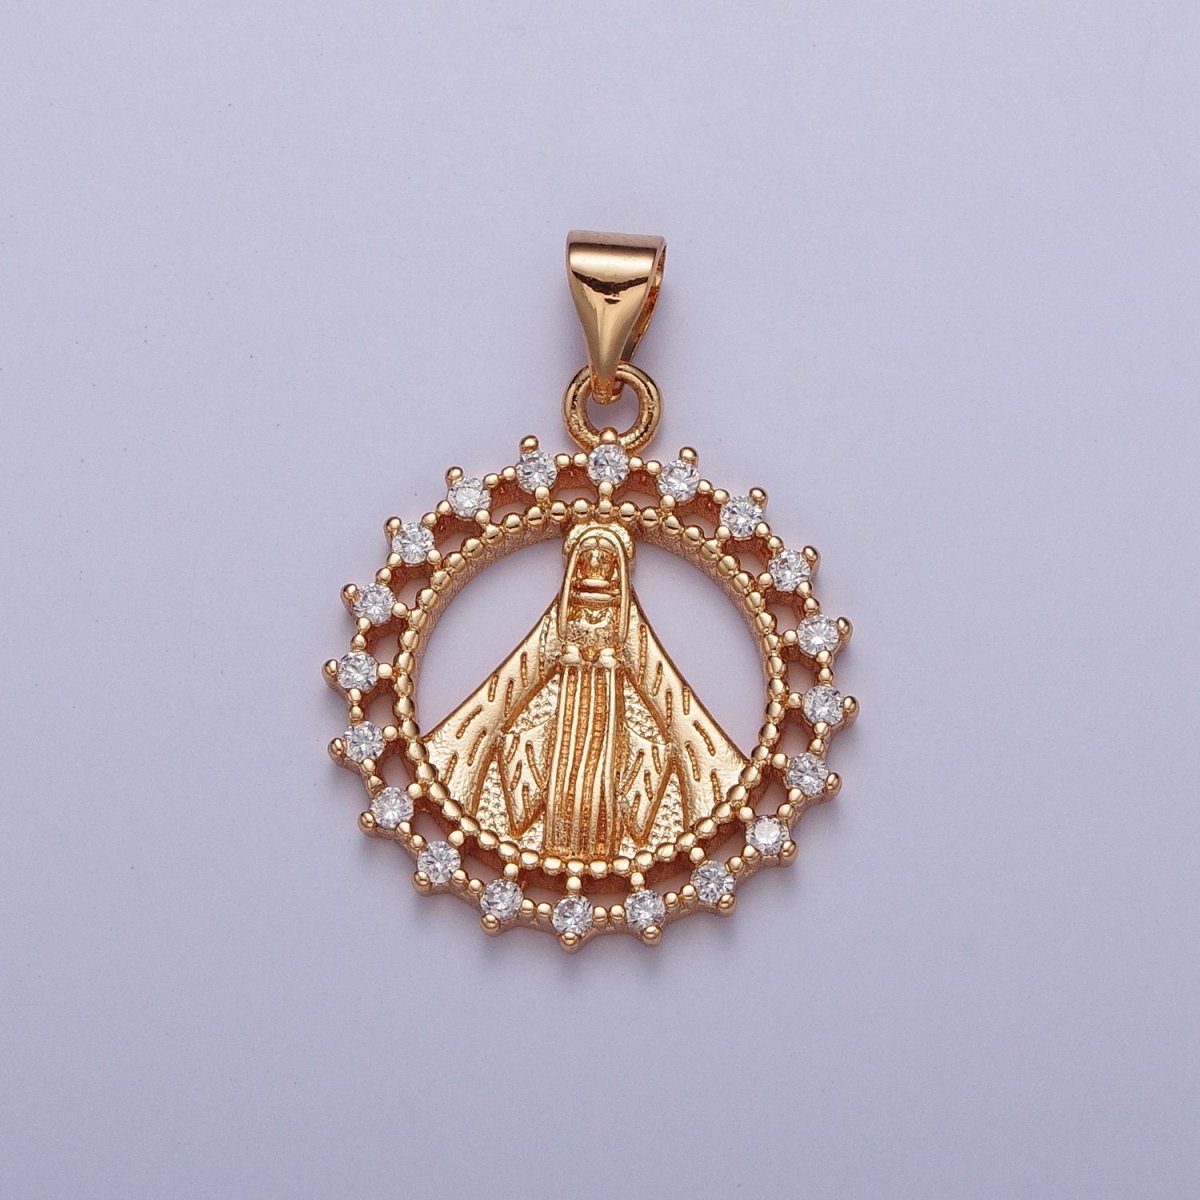 Gold Micro Paved CZ Miraculous Lady Round Medallion Pendant Lady Guadalupe Virgin Mary For DIY Religious Jewelry Making H-730 - DLUXCA